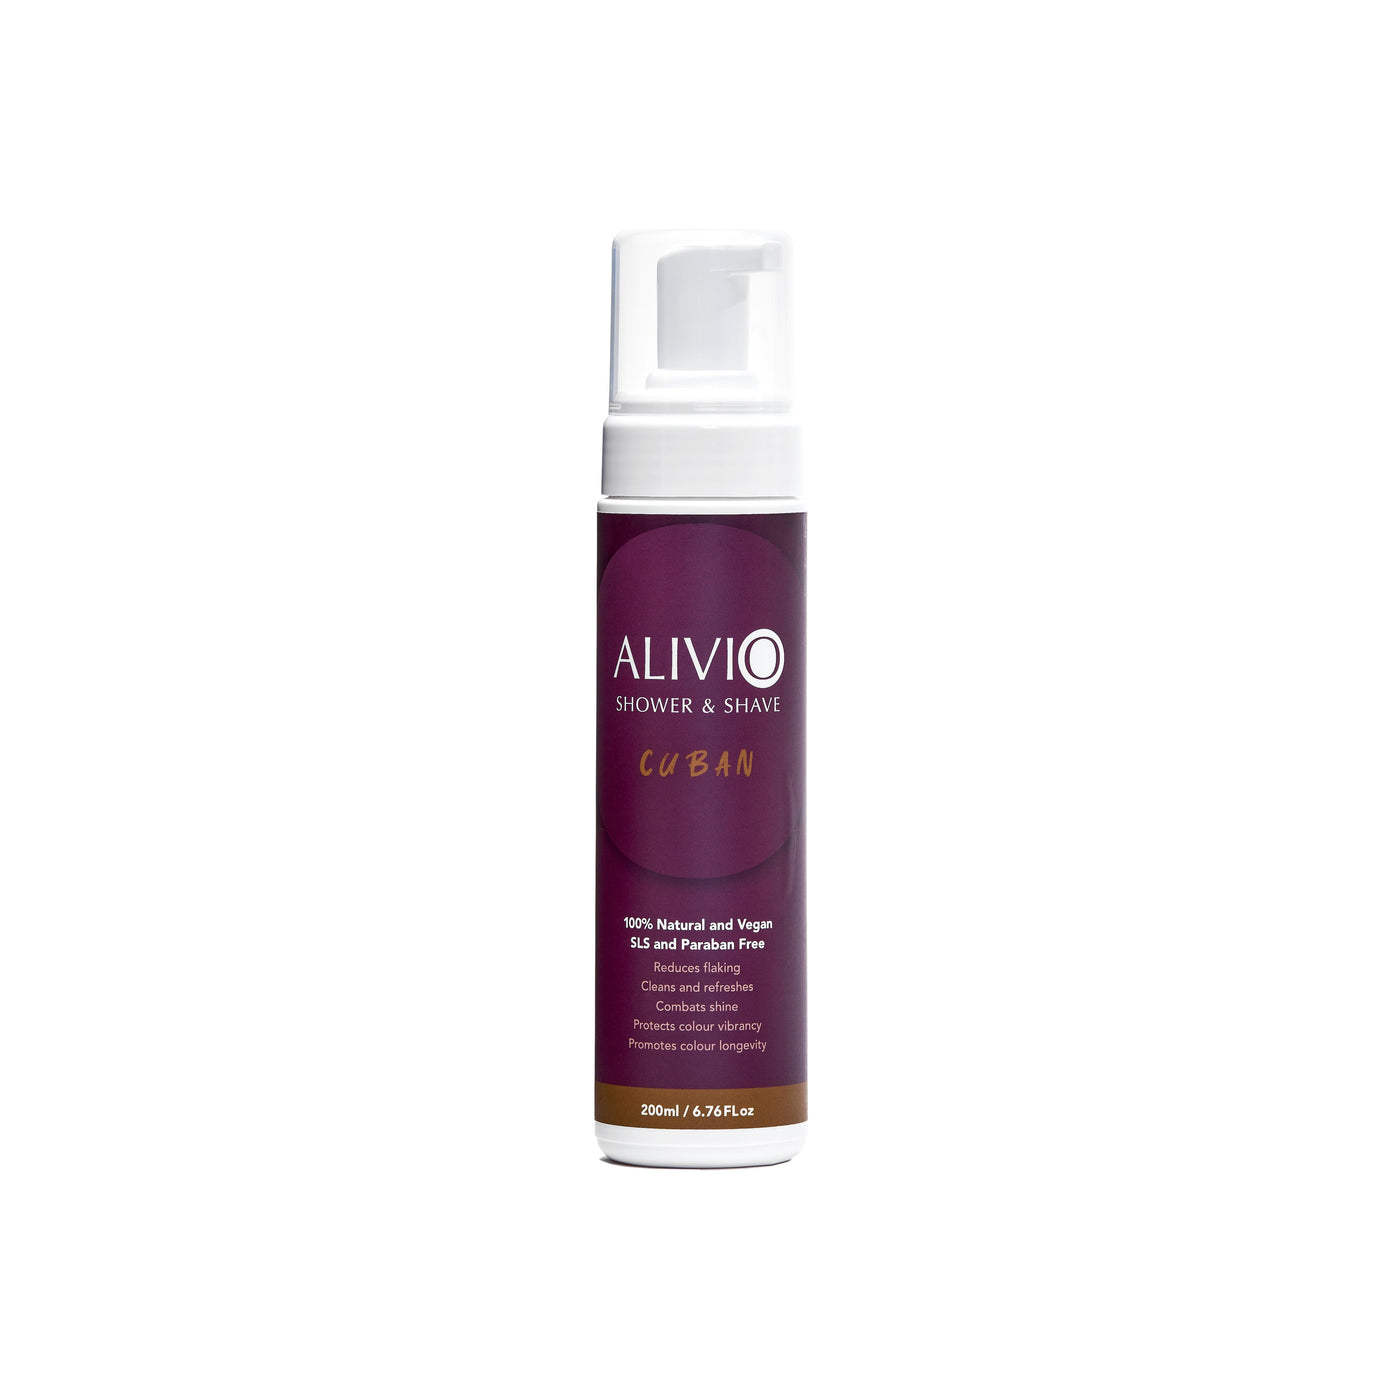 Alivio Shower & Shave - Aftercare - Pro Smp Supplies Inc